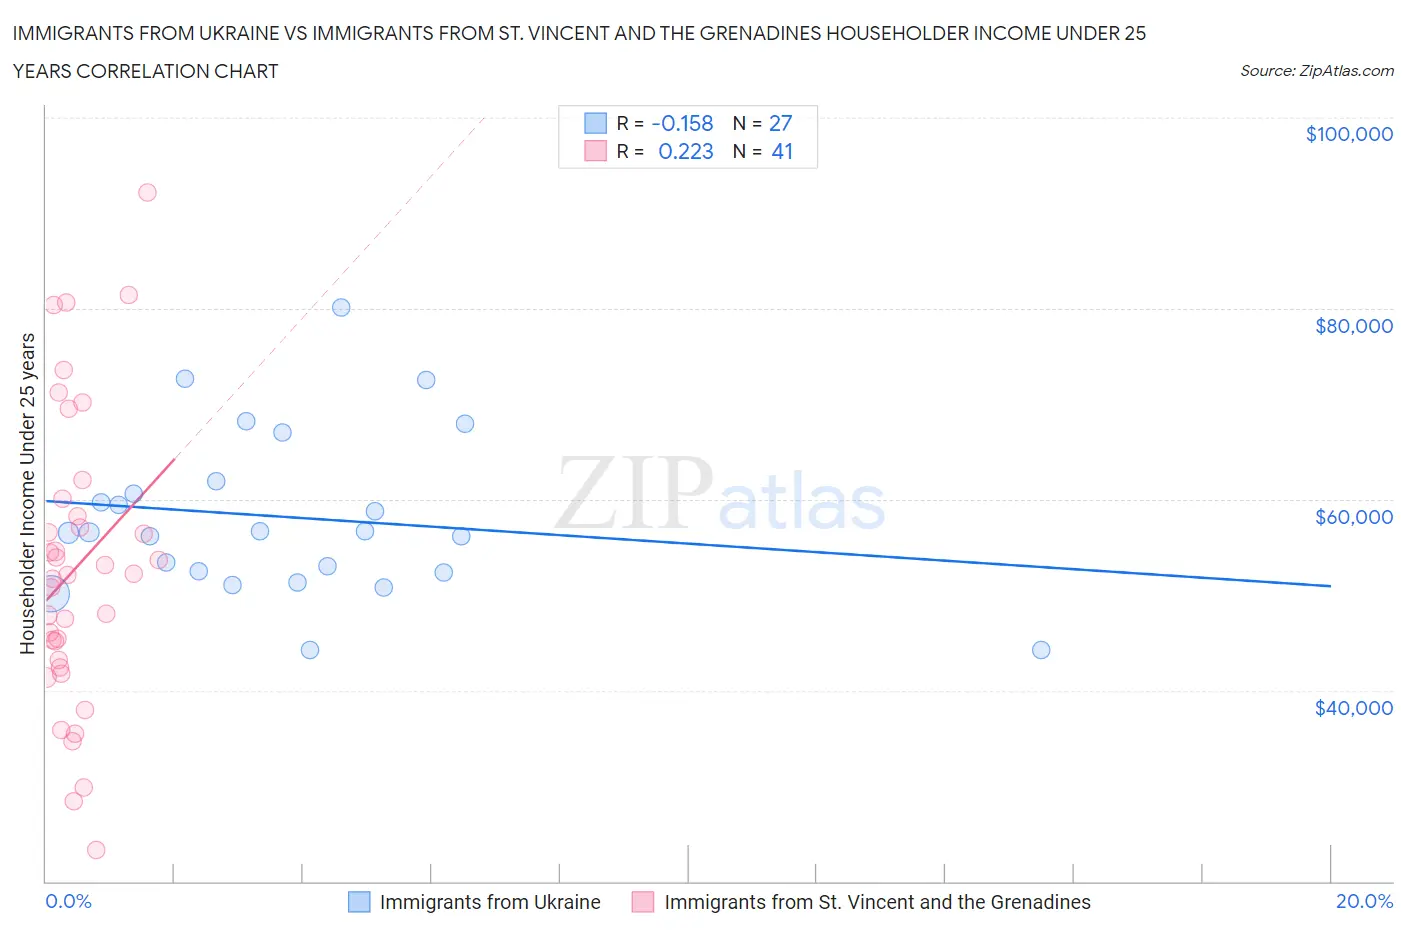 Immigrants from Ukraine vs Immigrants from St. Vincent and the Grenadines Householder Income Under 25 years